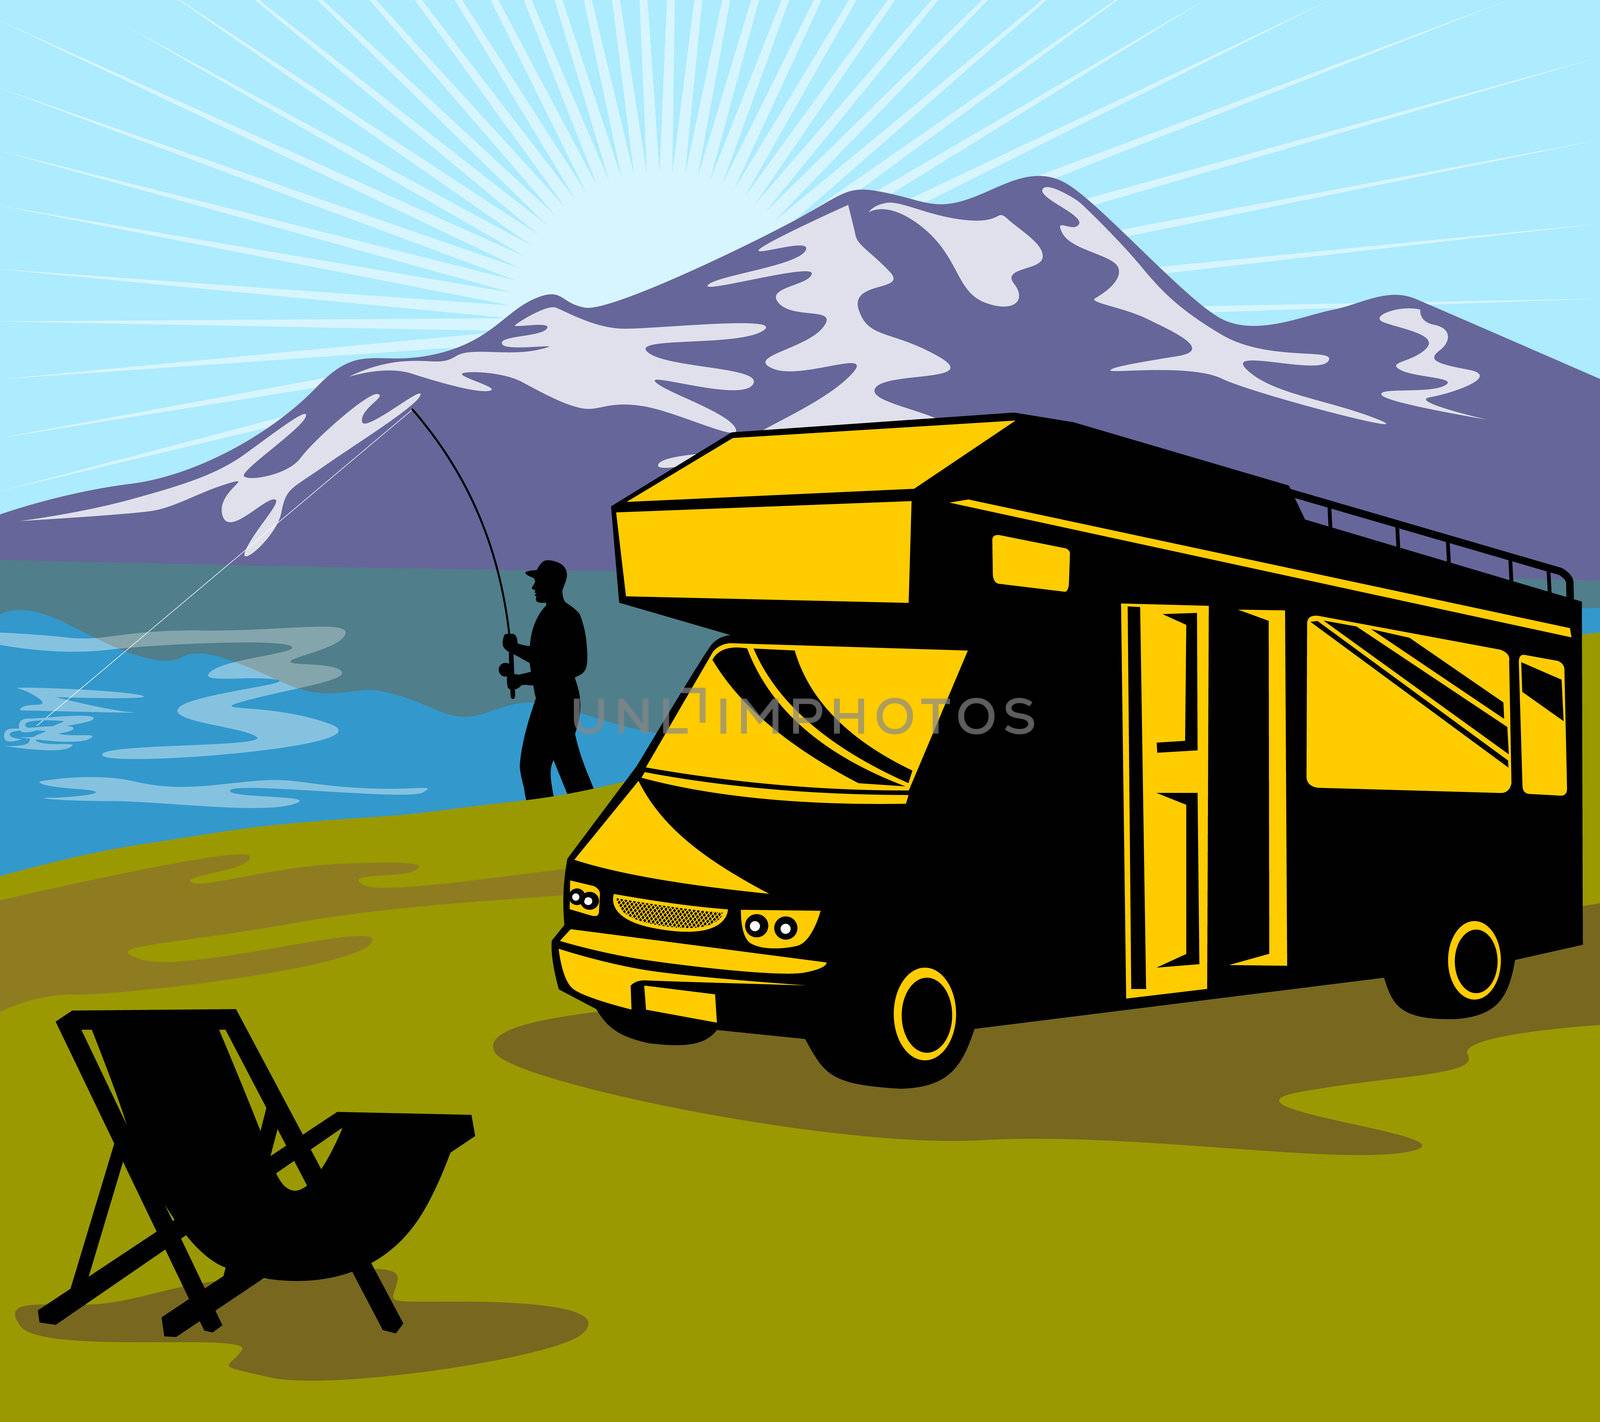 illustration of a Fly fisherman fishing with fly rod and reel with lake and mountains and sunburst in background and folding chair and camper van in the foreground done in retro style